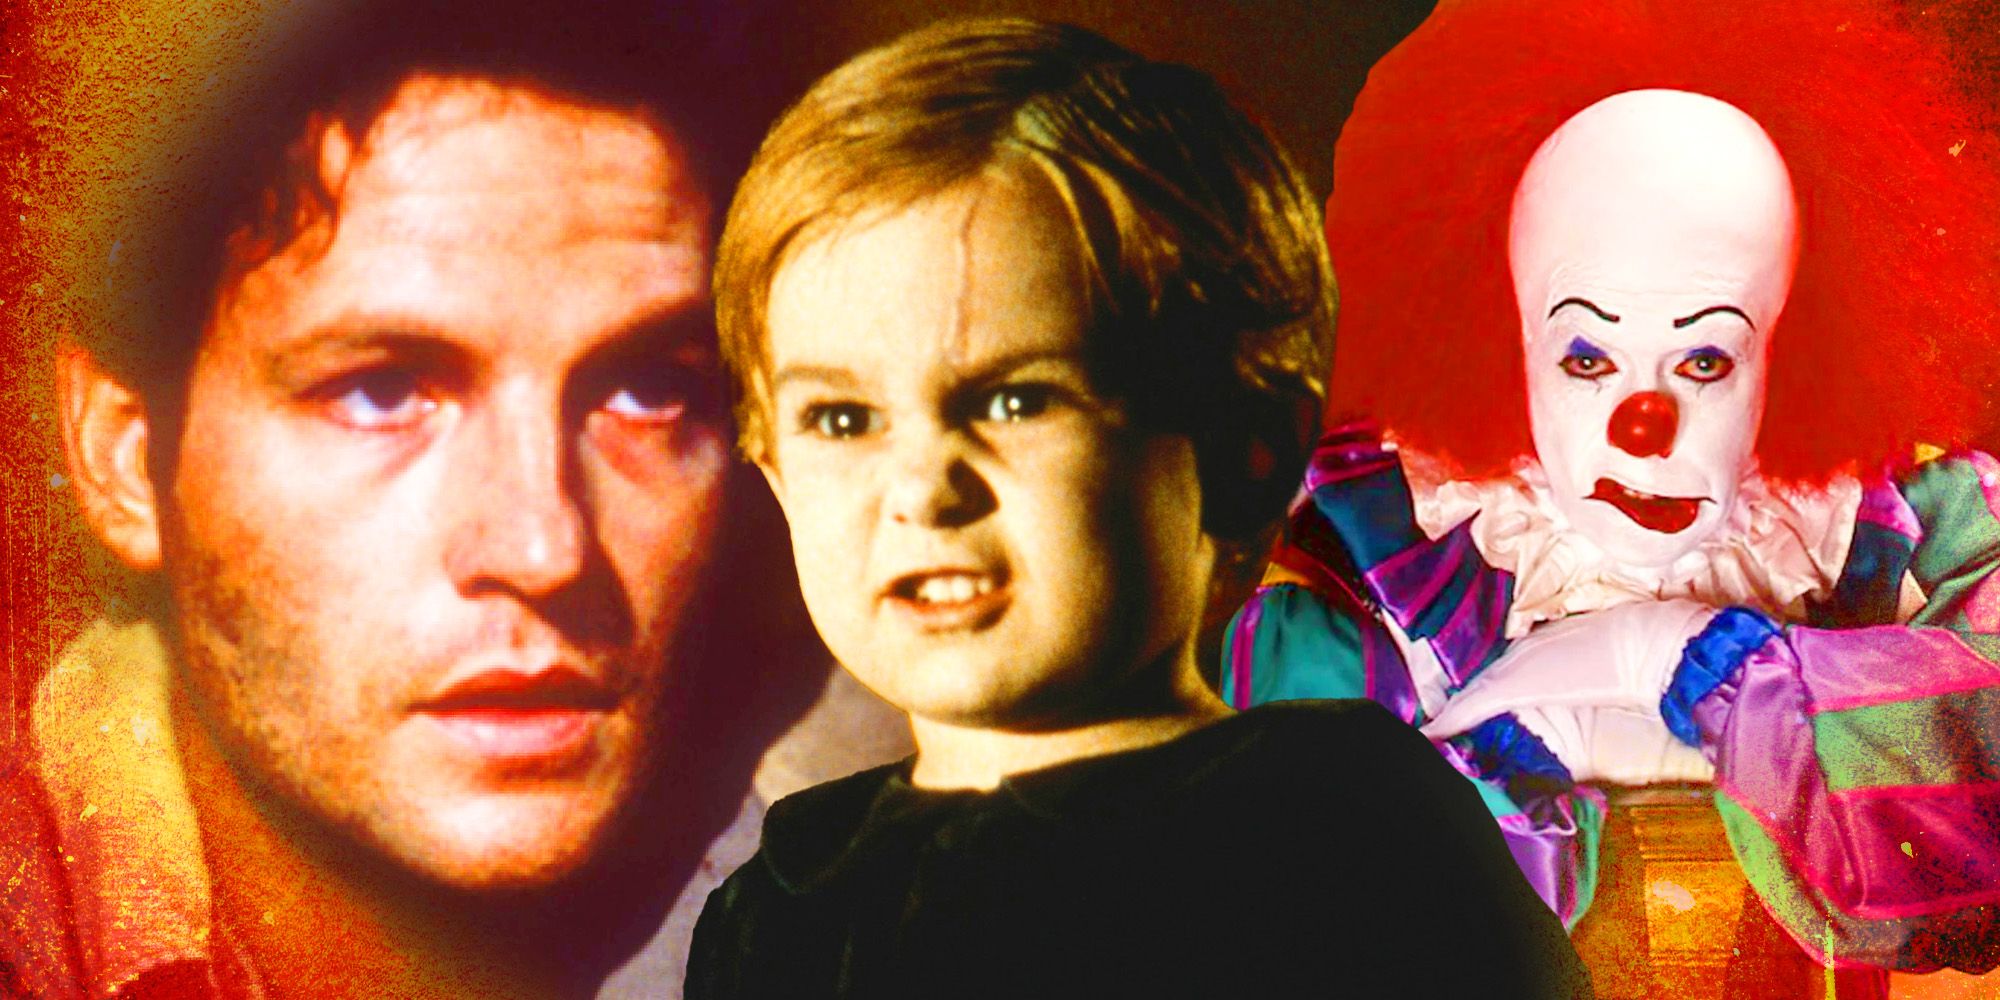 Pet Sematary 1989's Louis, Gage, and Tim Curry's Pennywise